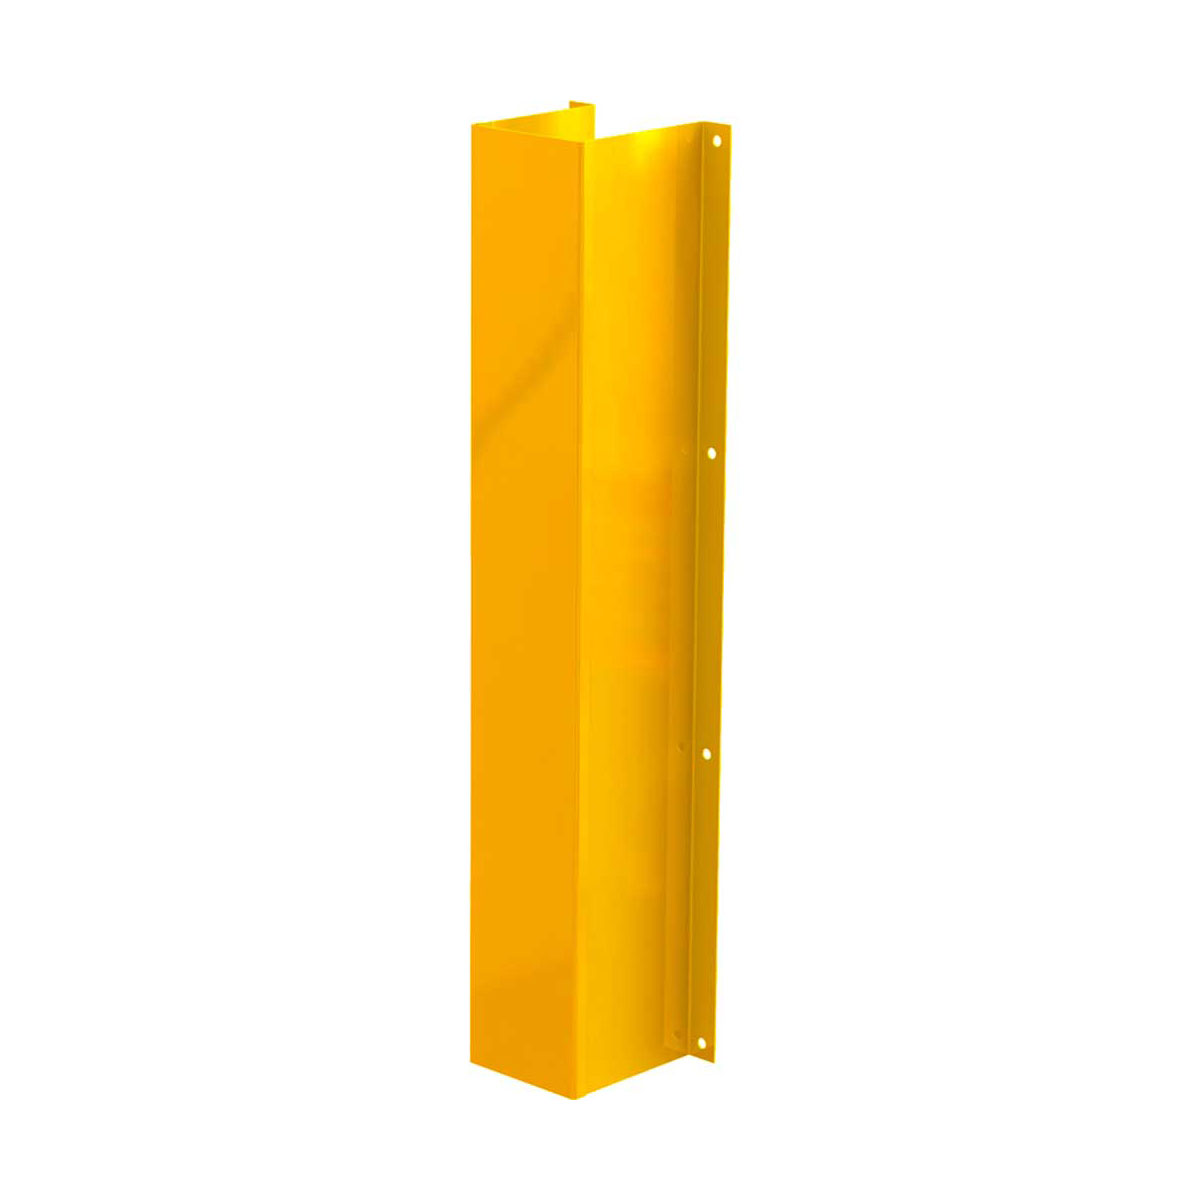 Buy Downpipe Protector - Square in Downpipe Protectors from GuardX available at Astrolift NZ